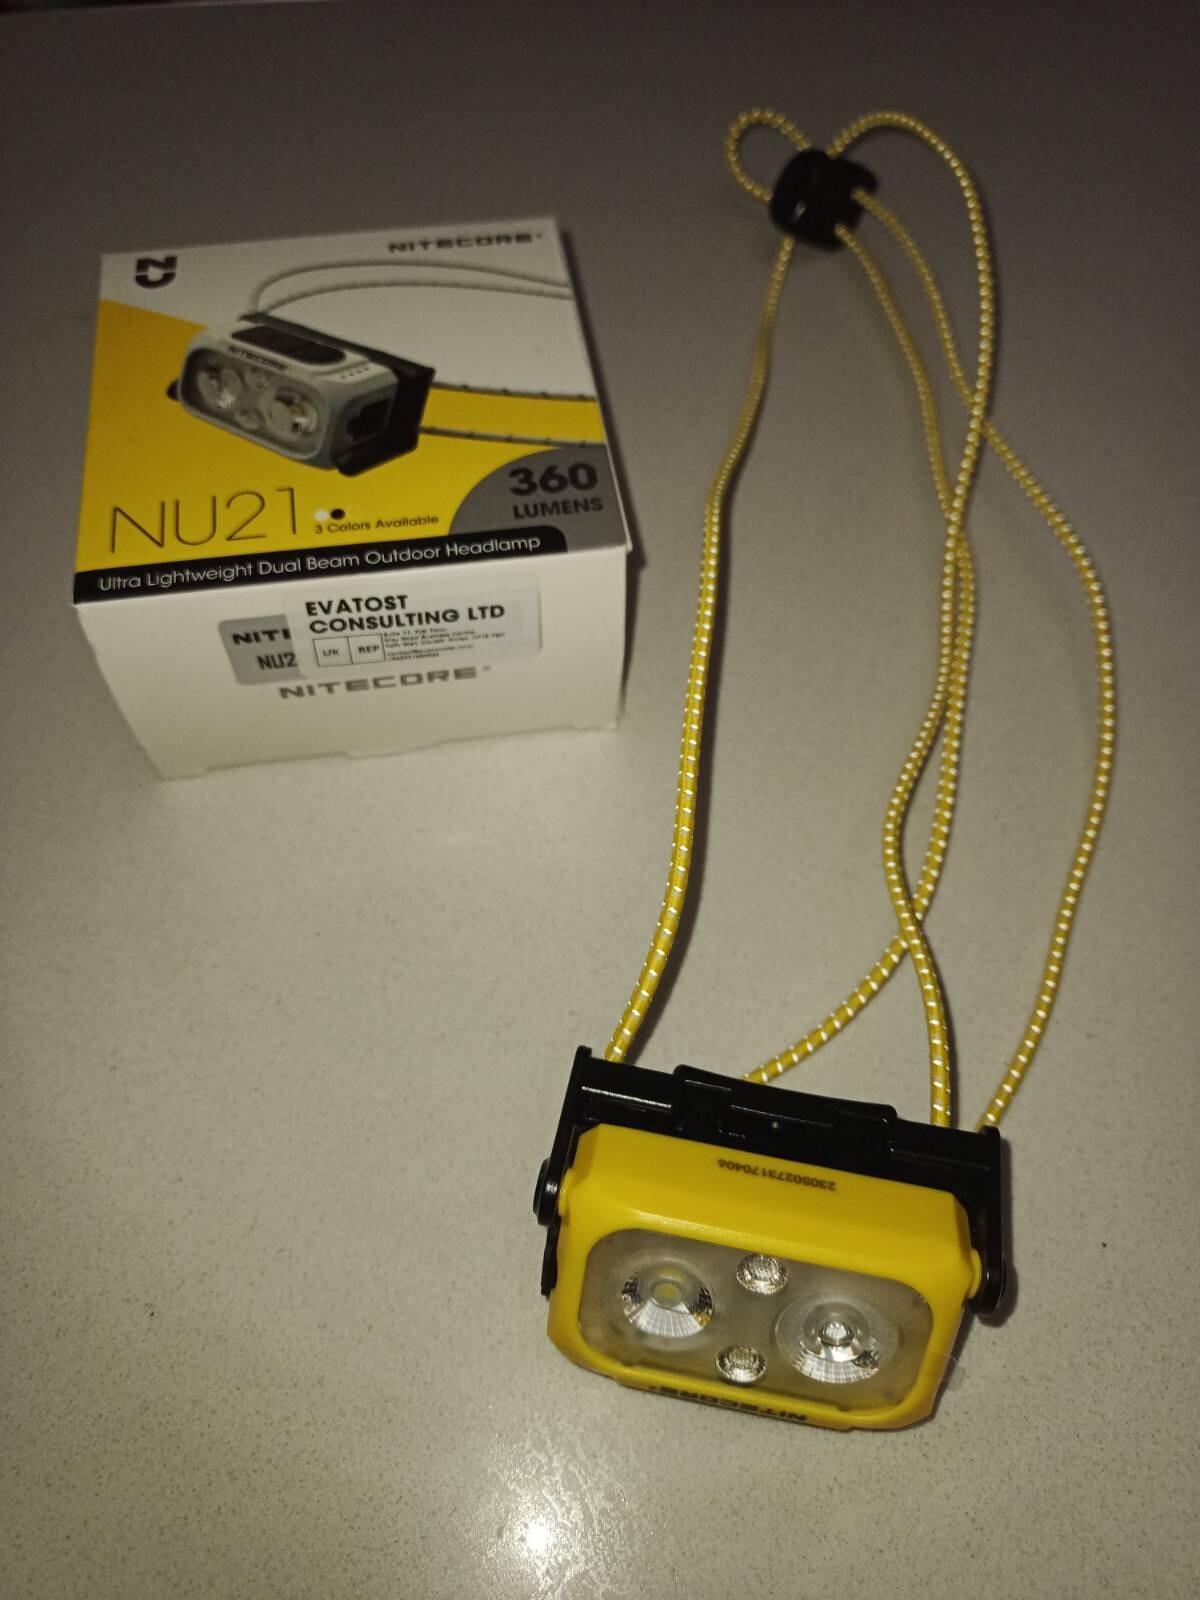 A yellow head torch with cord bands lays next to a yellow and white NU21 box